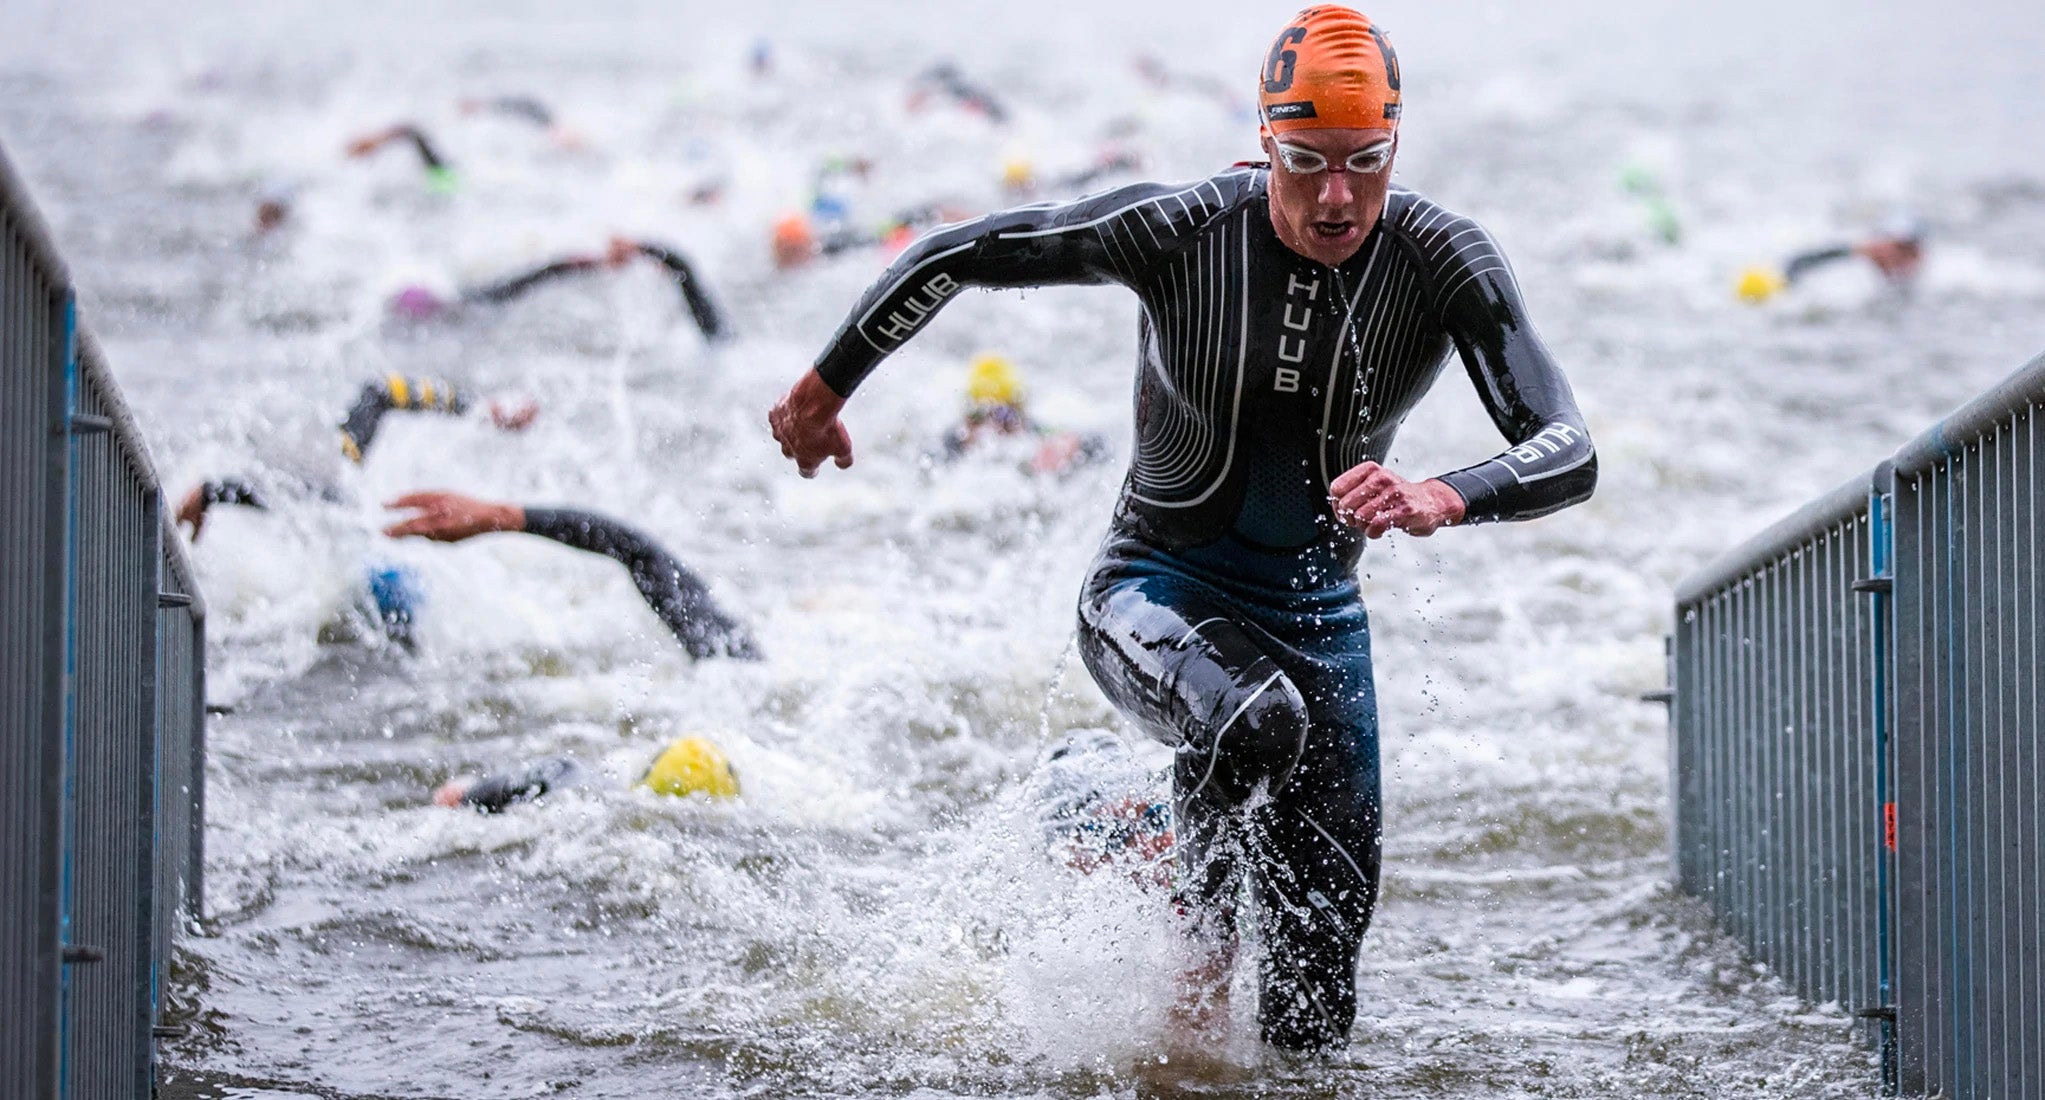 HUUB launches crowdfunding campaign amidst endurance sport boom